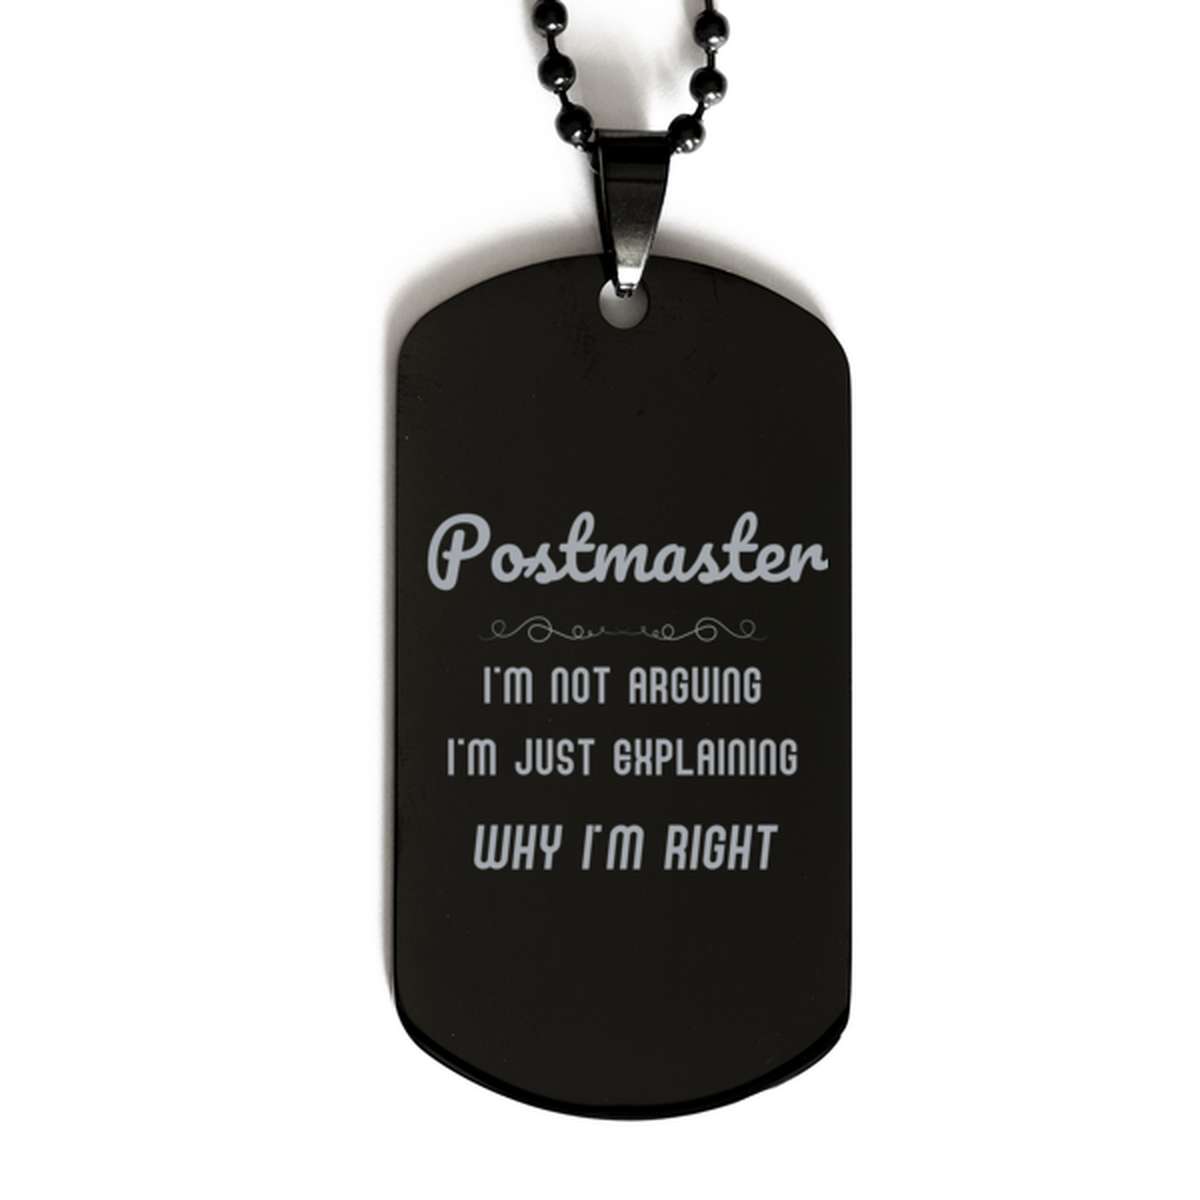 Postmaster I'm not Arguing. I'm Just Explaining Why I'm RIGHT Black Dog Tag, Funny Saying Quote Postmaster Gifts For Postmaster Graduation Birthday Christmas Gifts for Men Women Coworker